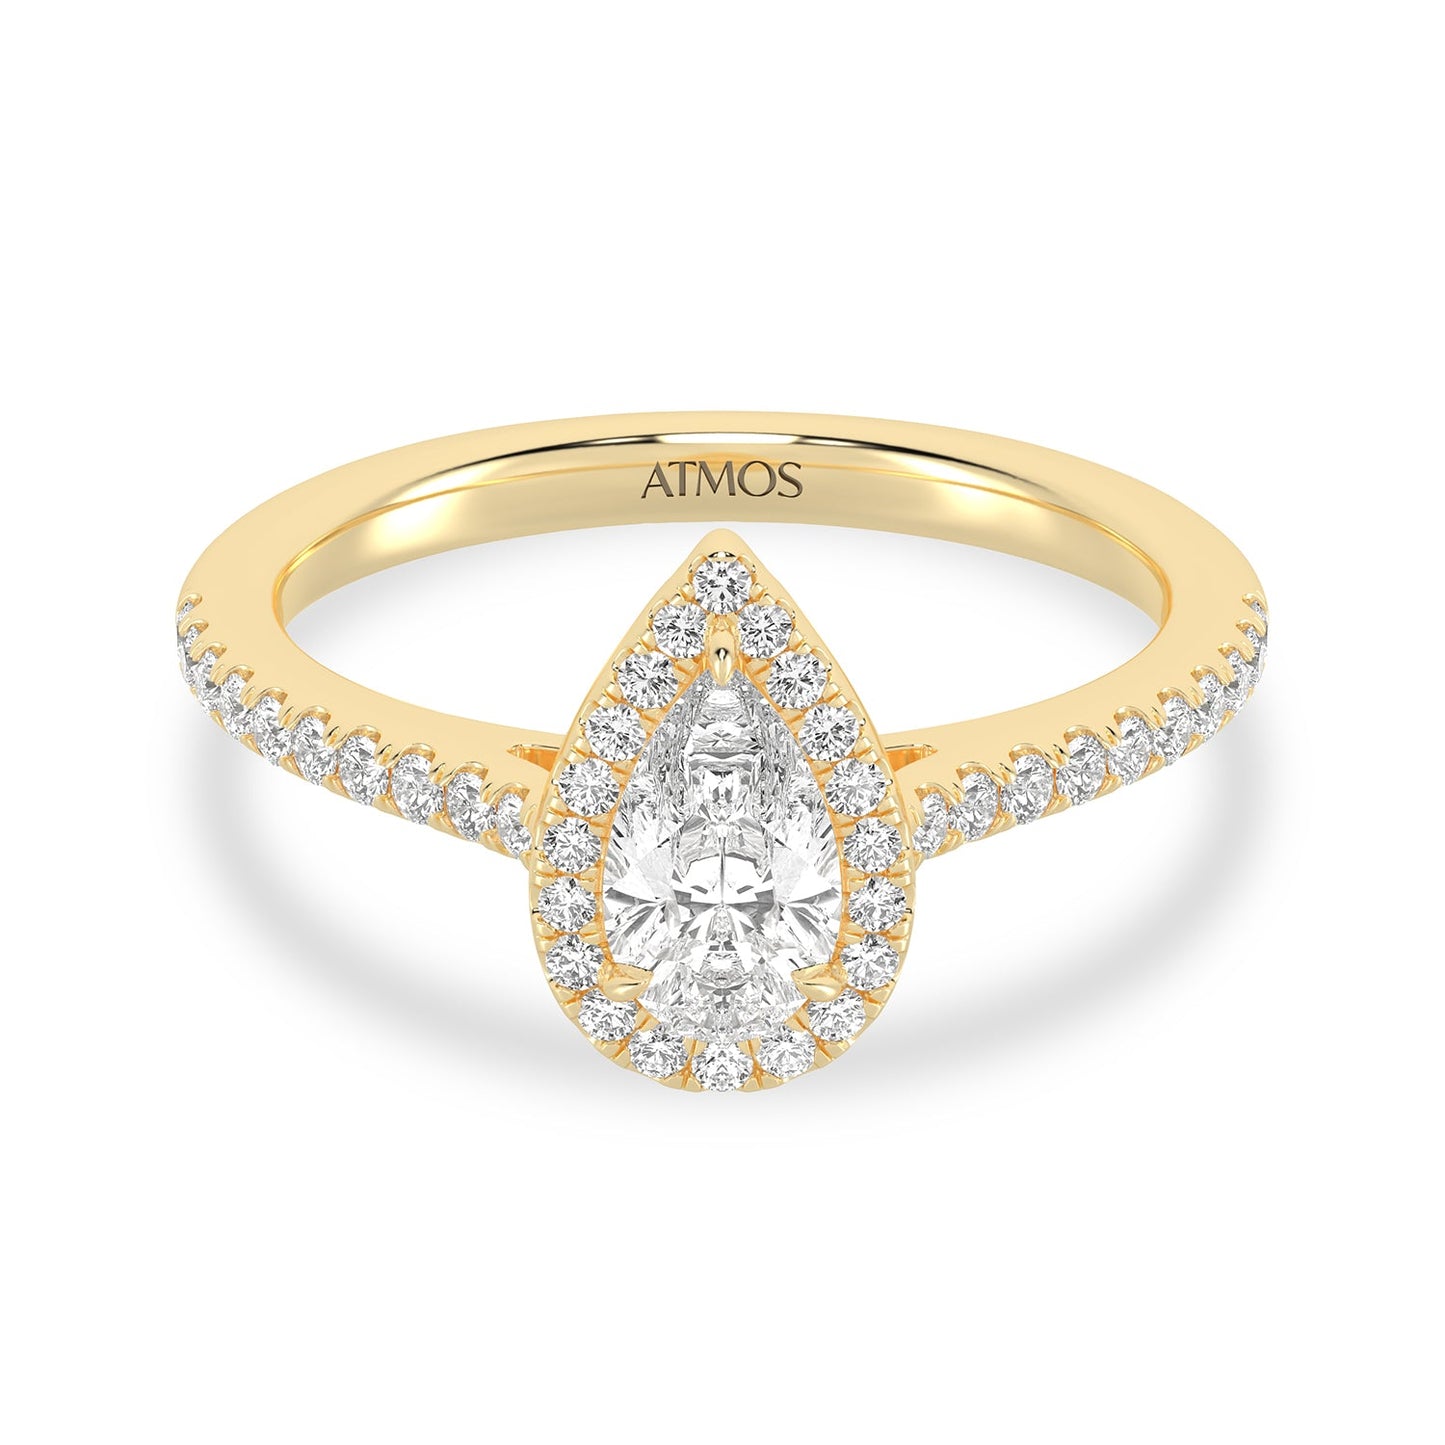 Atmos Signature Dewdrop Halo Ring_Product Angle_1 Ct. - 1